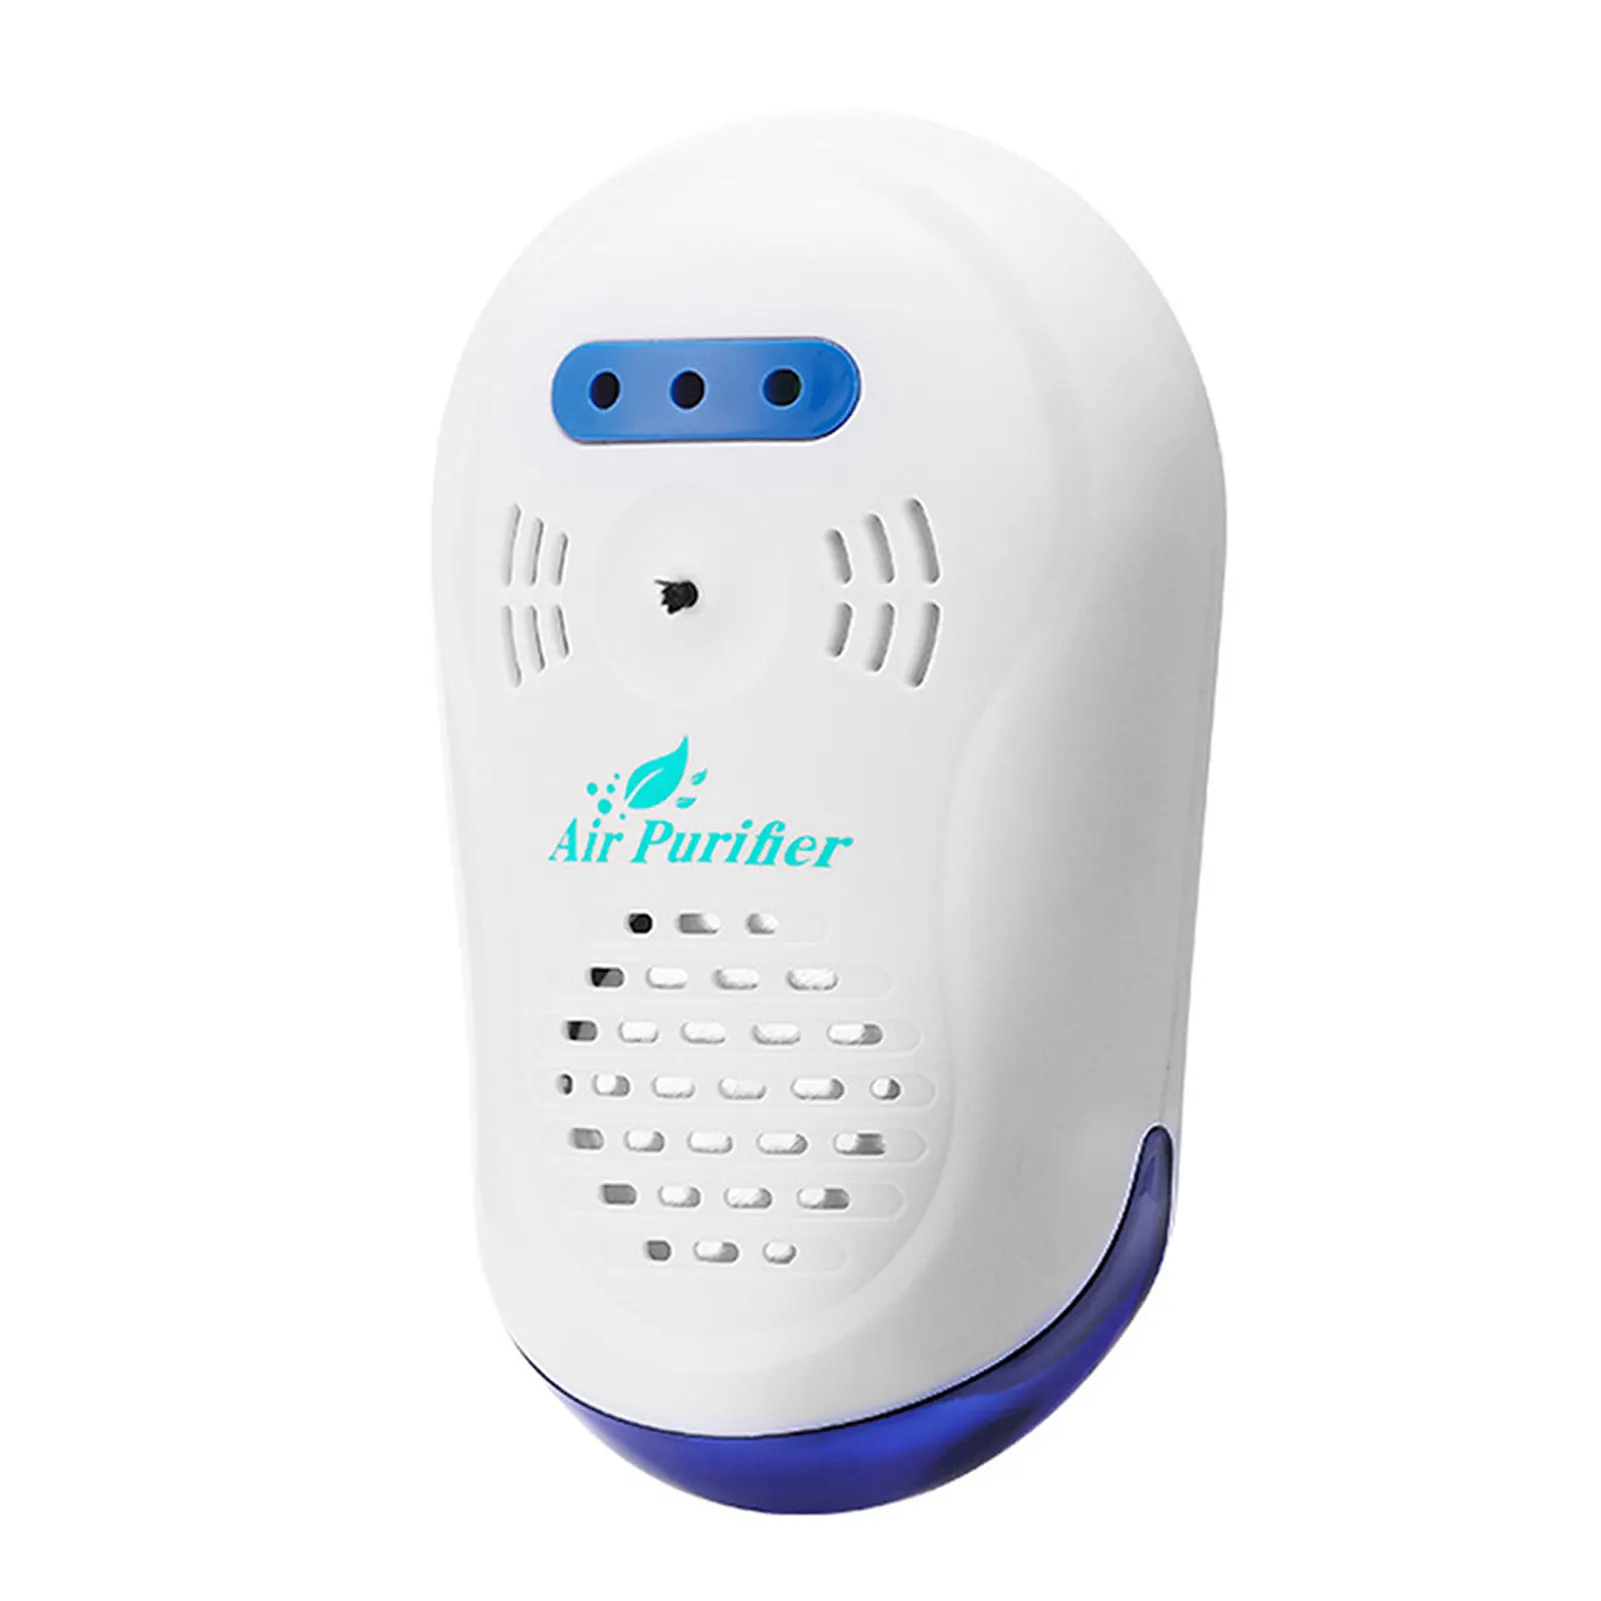 

Negative Air Purifier Easy to Use and Carry Air Purifier Perfect for Travel Camping Picnic